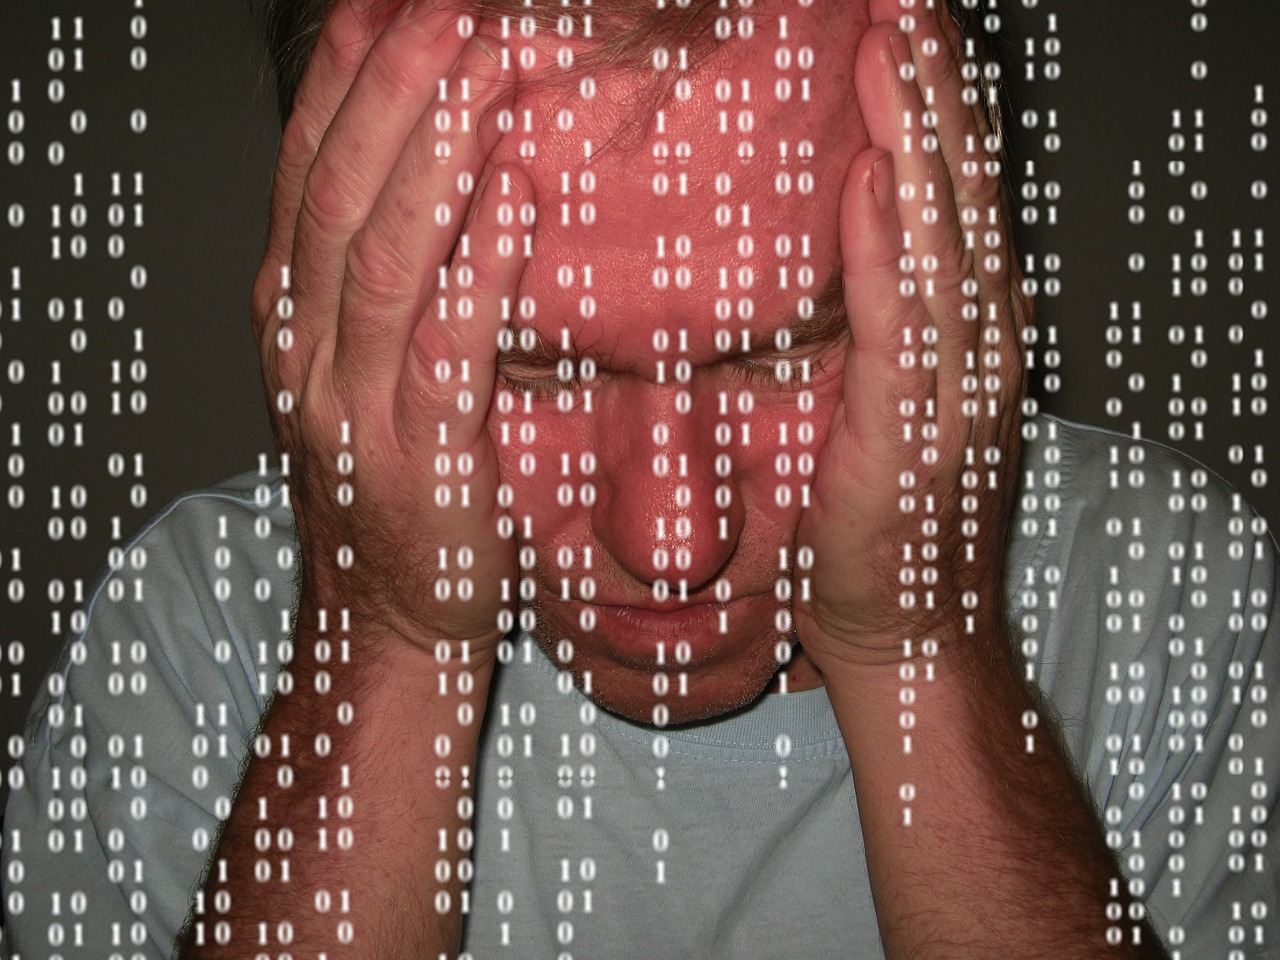 Tips for maintaining business data security - a man holds his head in his hands behind a screen of symbolic computer data